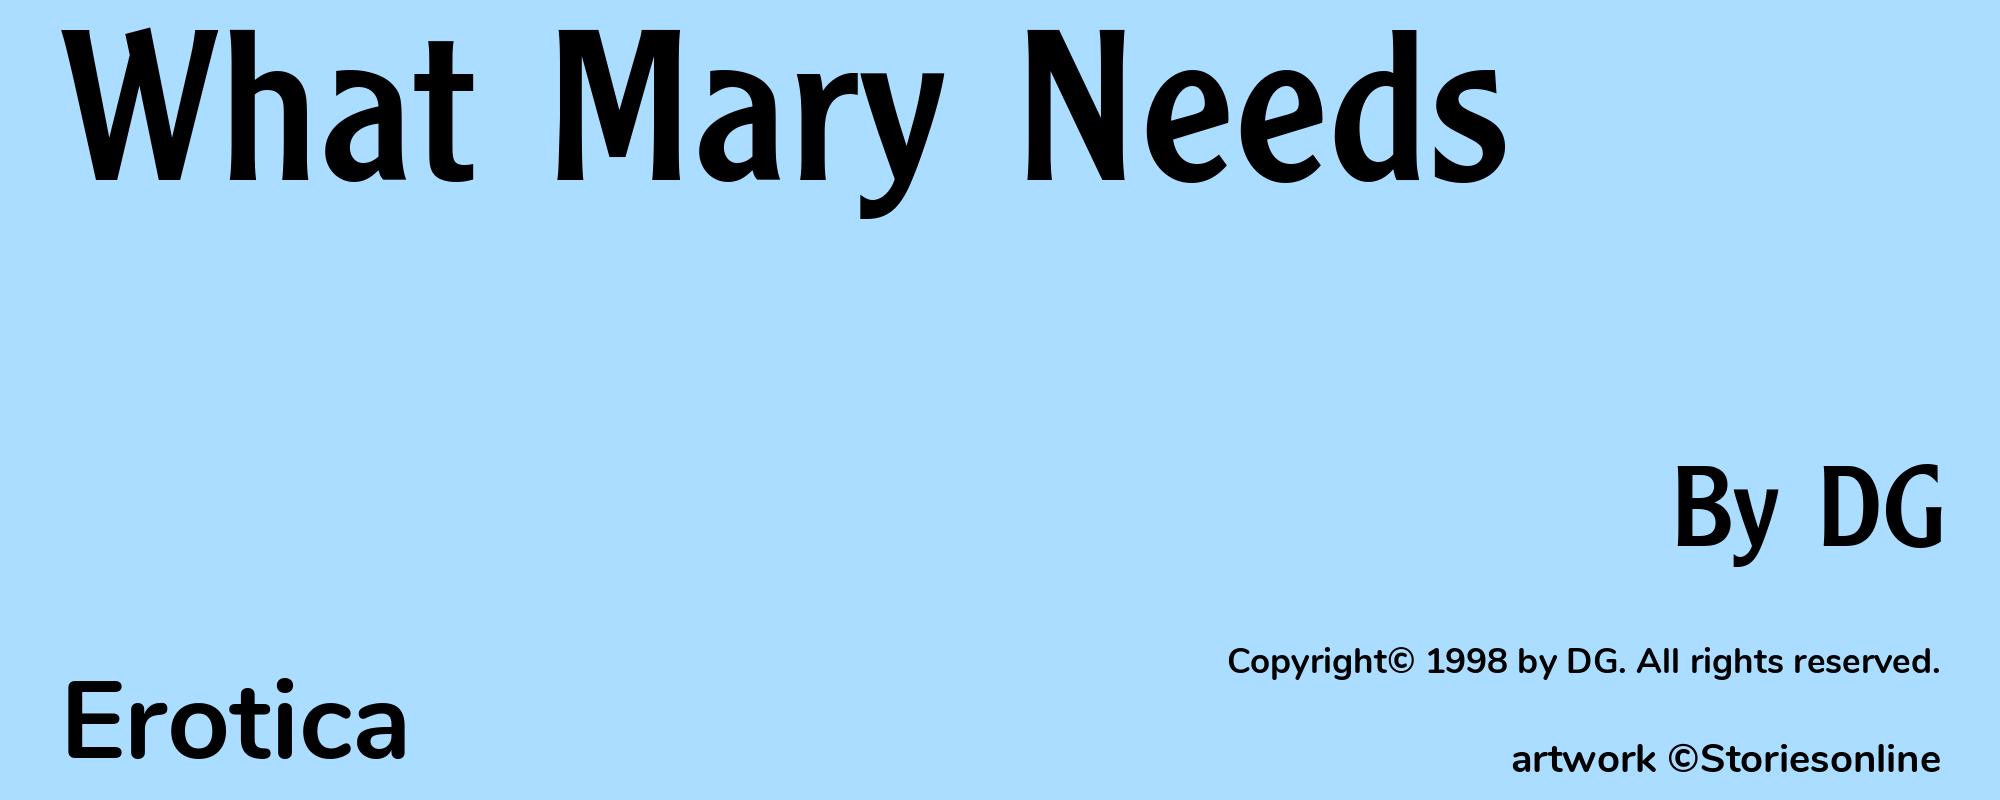 What Mary Needs - Cover